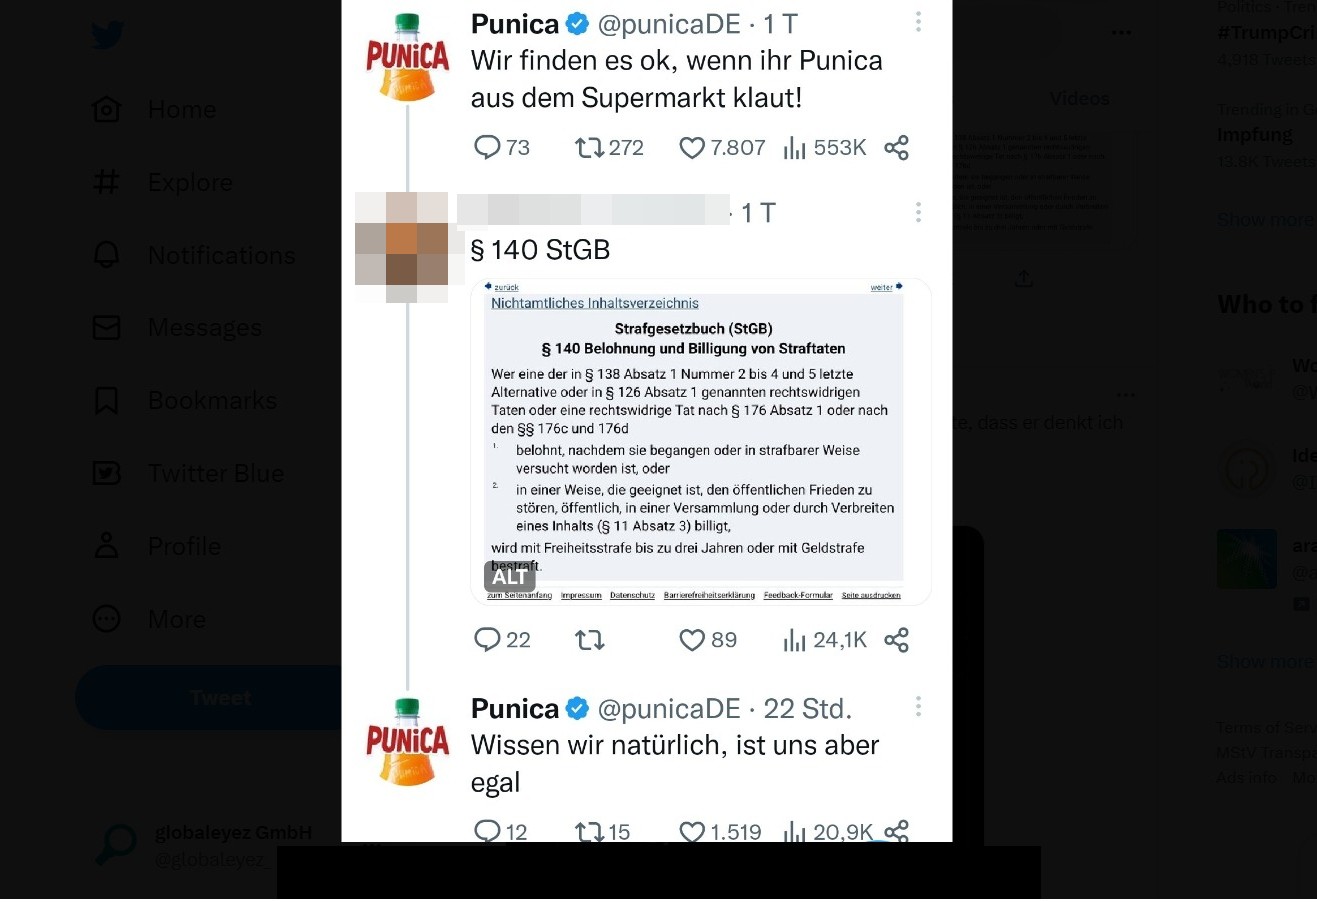 Screenshot of a tweet by the parody Punica account. Translation: We think it’s OK to steal Punica juice from the supermarket. (translated by globaleyez) After a user pointed out that stealing is against German criminal law, the parody Punica account 